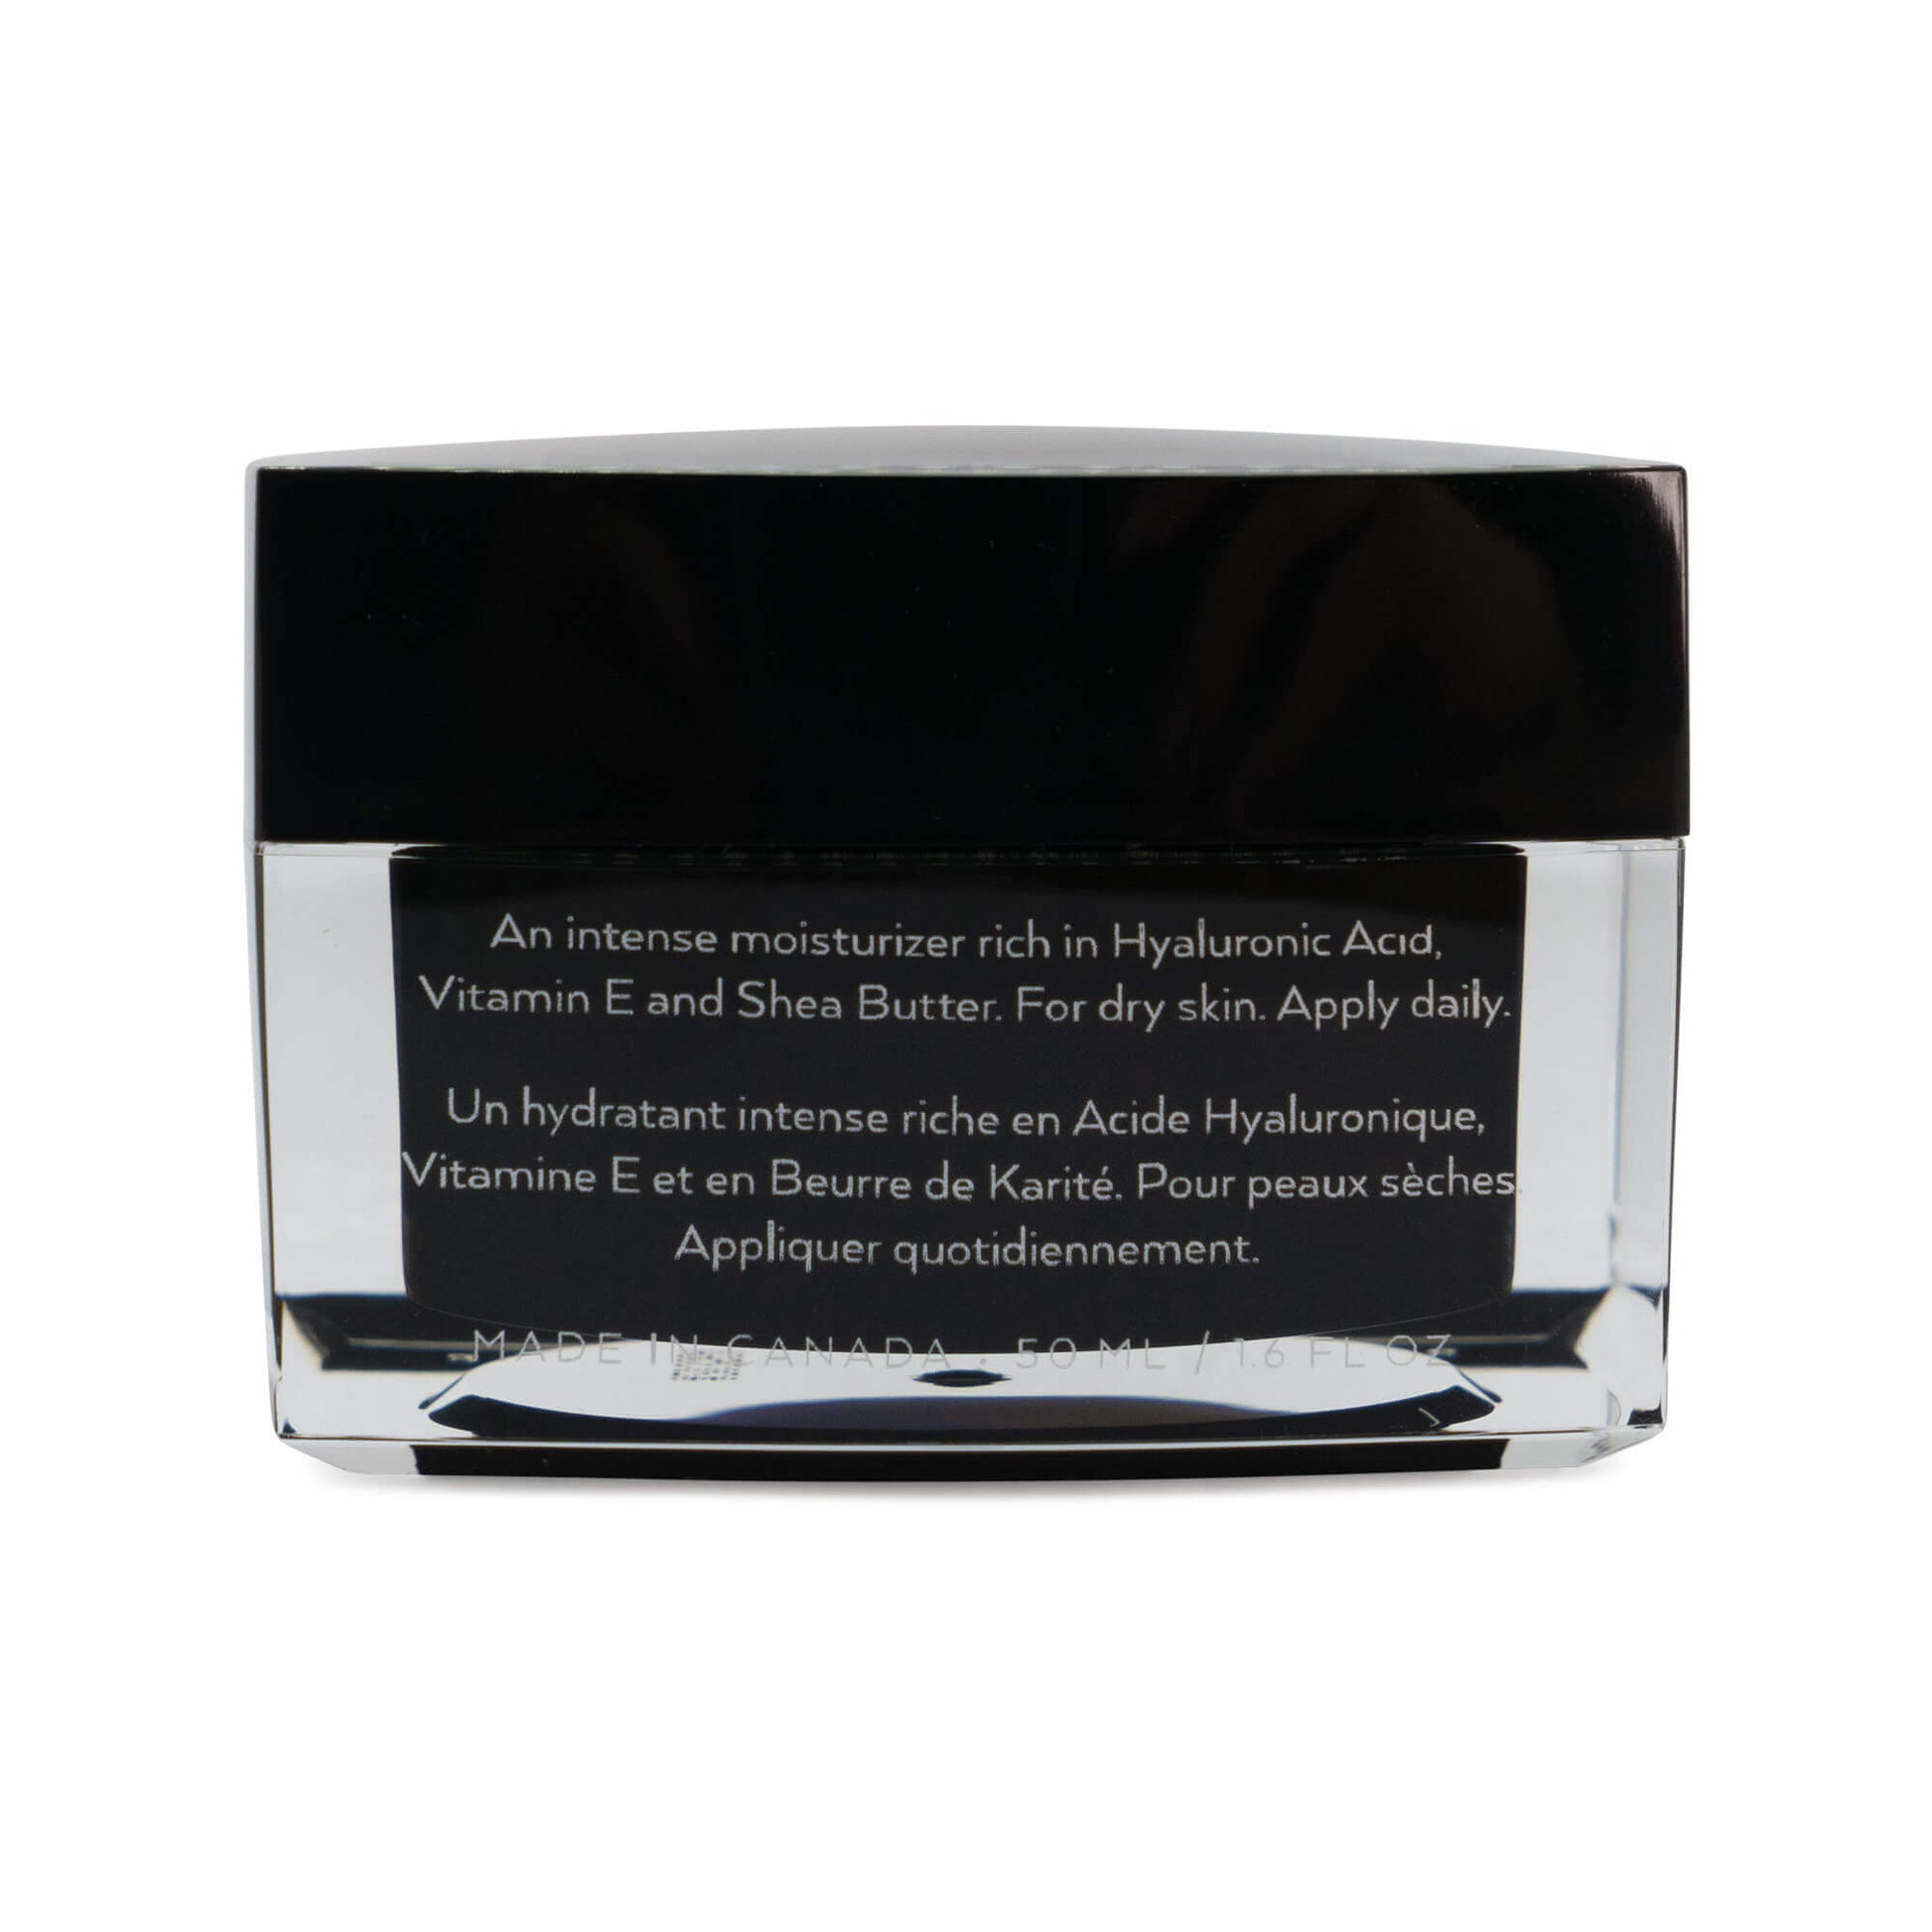 A jar of hyaluronic moisturizer, containing black and white cream, placed on a white surface.